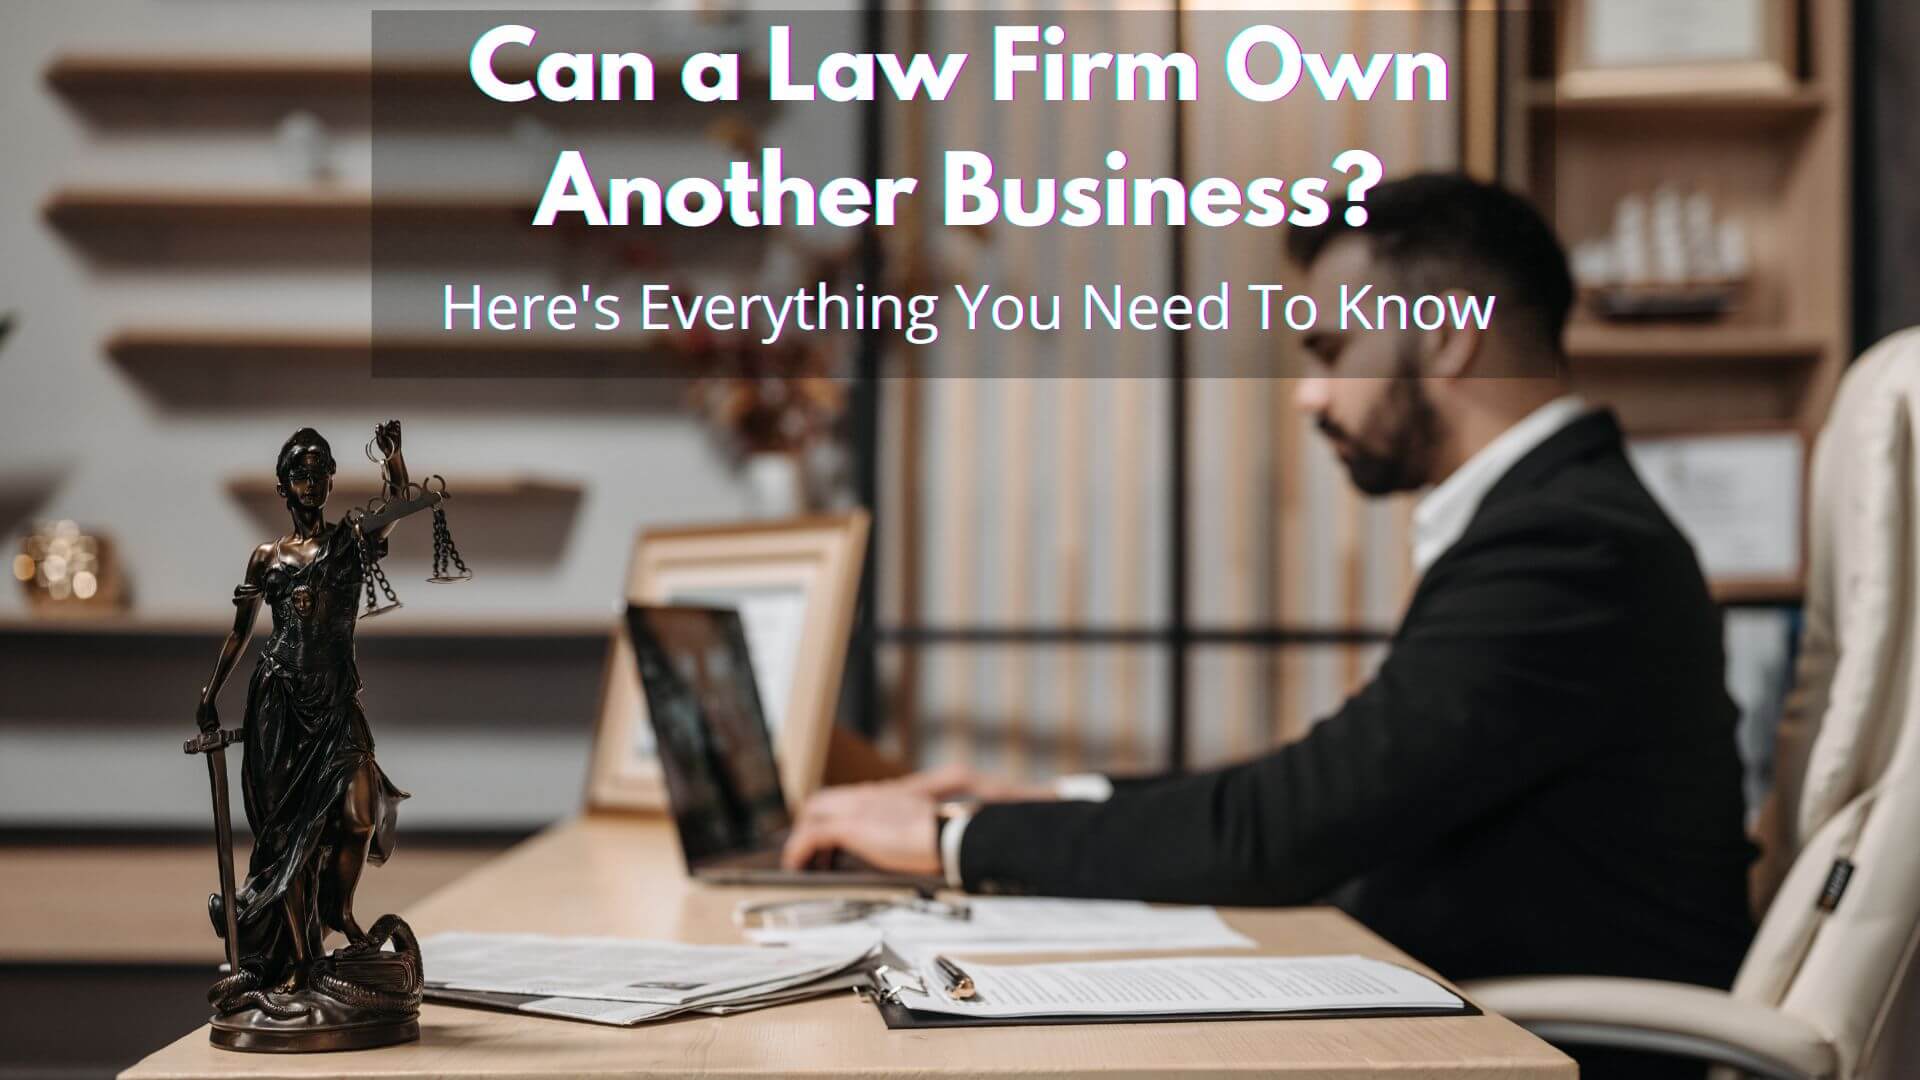 A law firm can own another business, Here are the few things you need to know before you venture down that path.